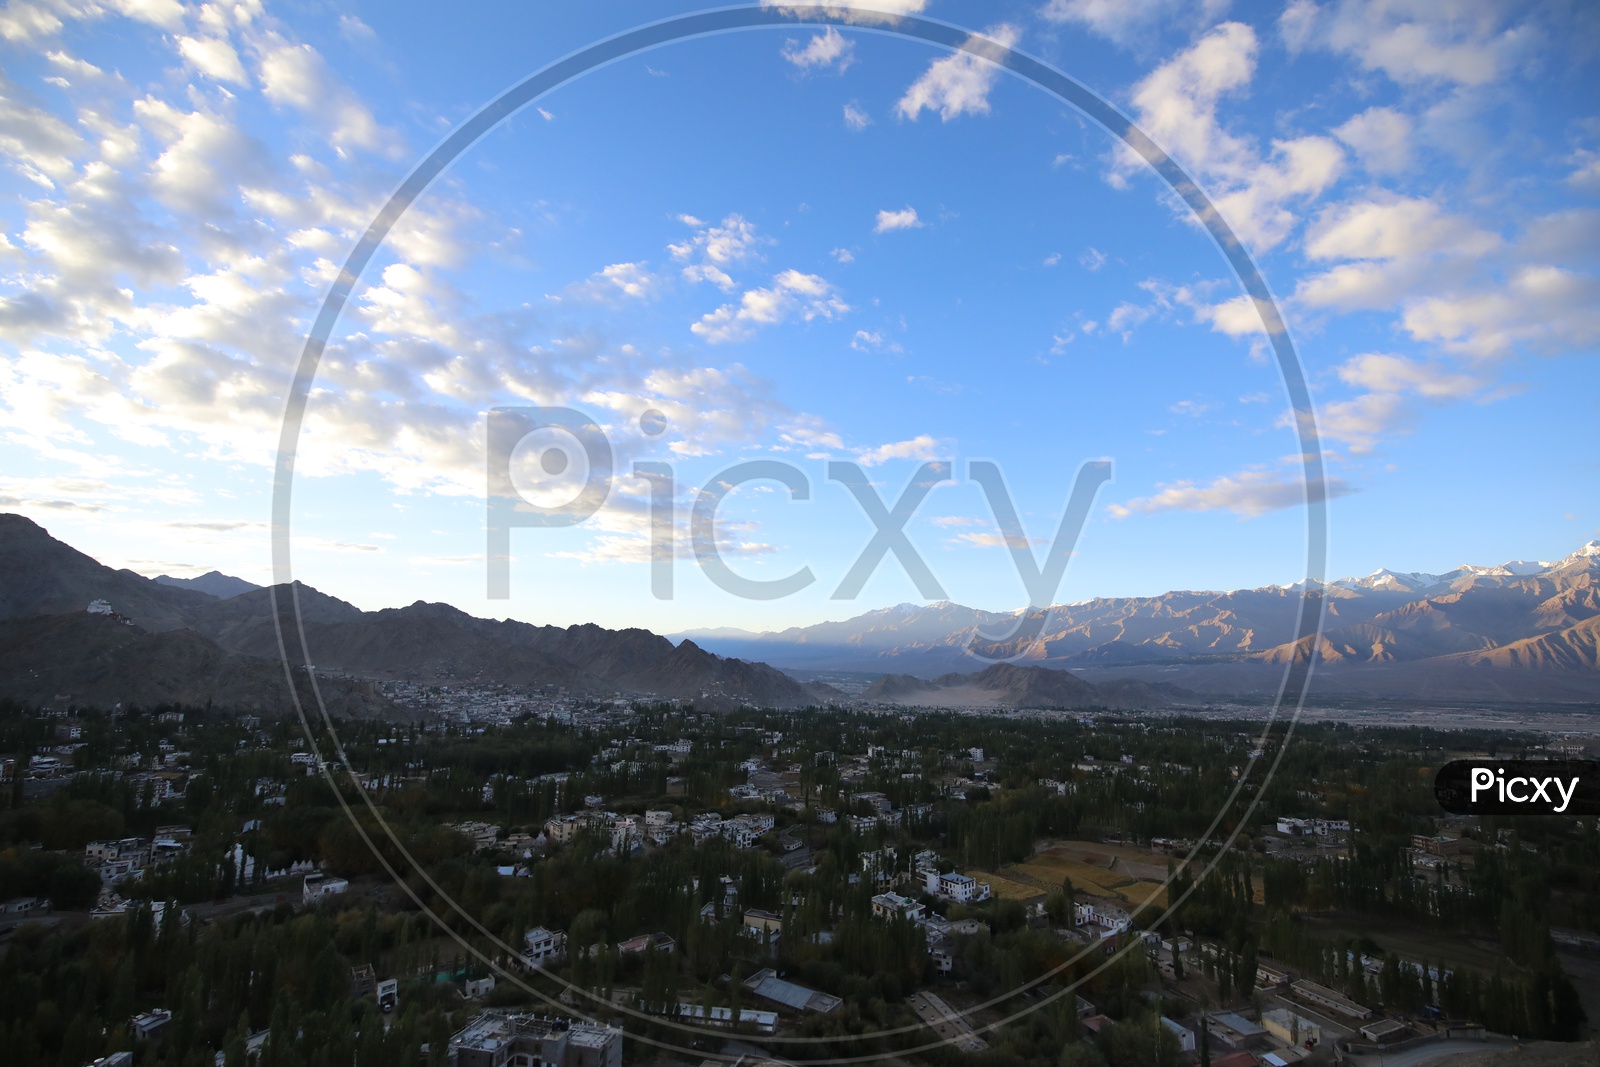 Beautiful Landscape of Snow Capped Mountains of Leh with Village in the foreground